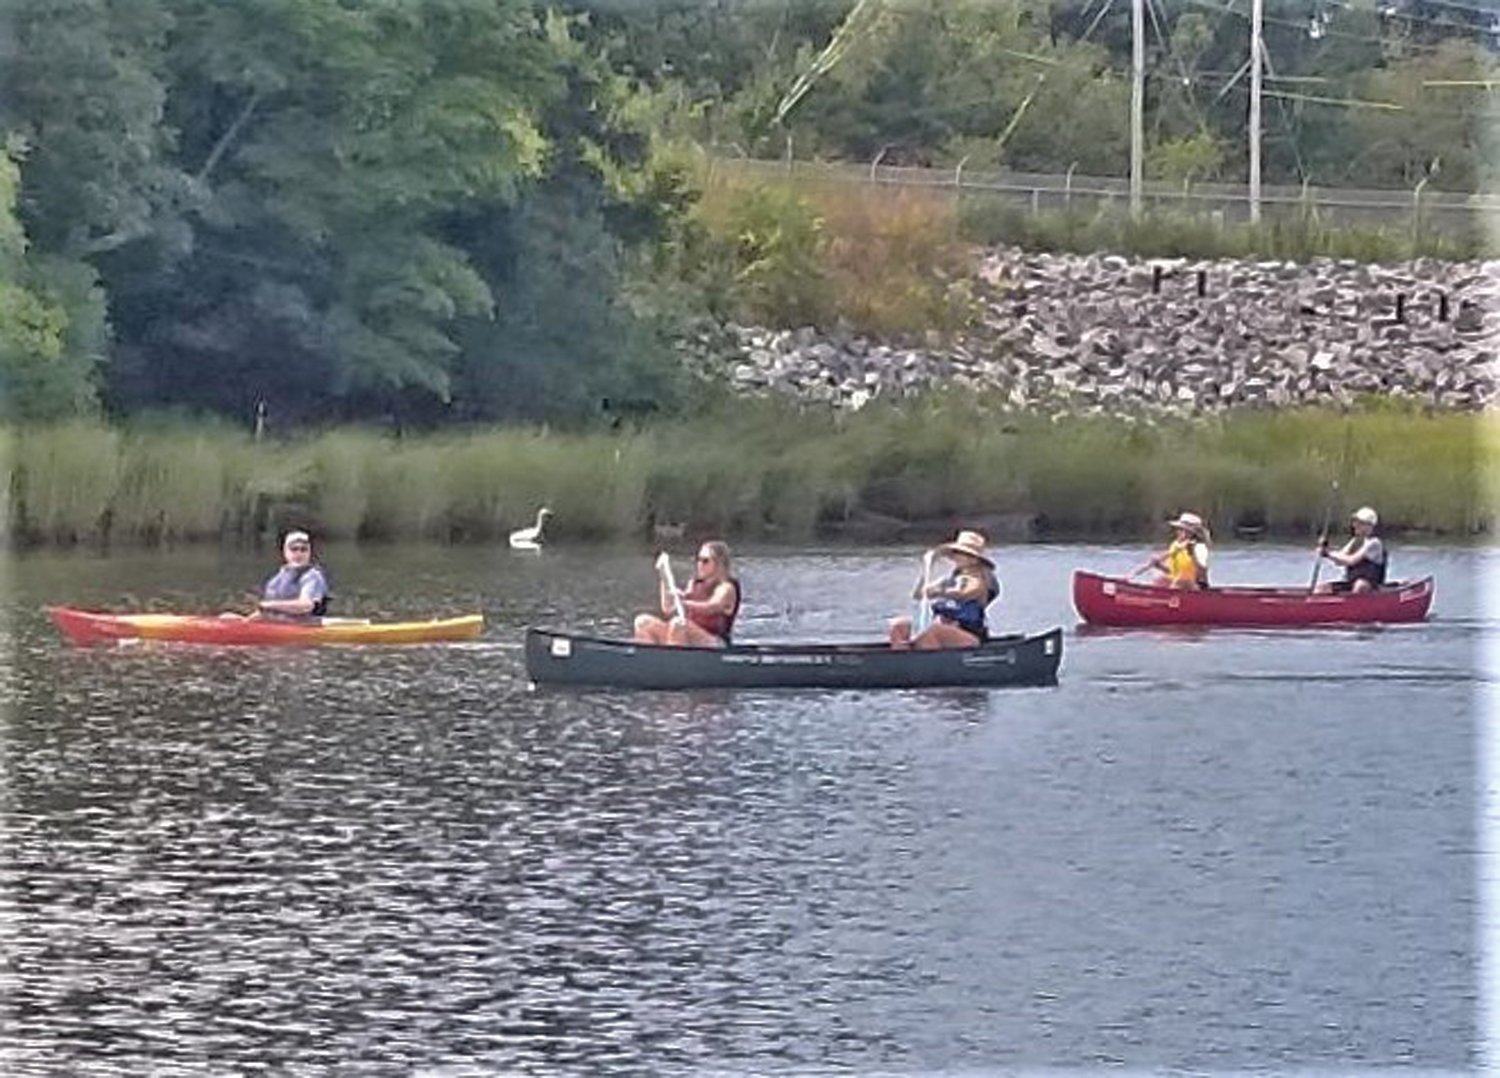 LEADERS OF THE PACK: Fifty kayakers and canoeists paddled from Pawtucket to Providence Sunday to celebrate past and future efforts to clean and reclaim the Blackstone (Seekonk) River. (Submitted photo)